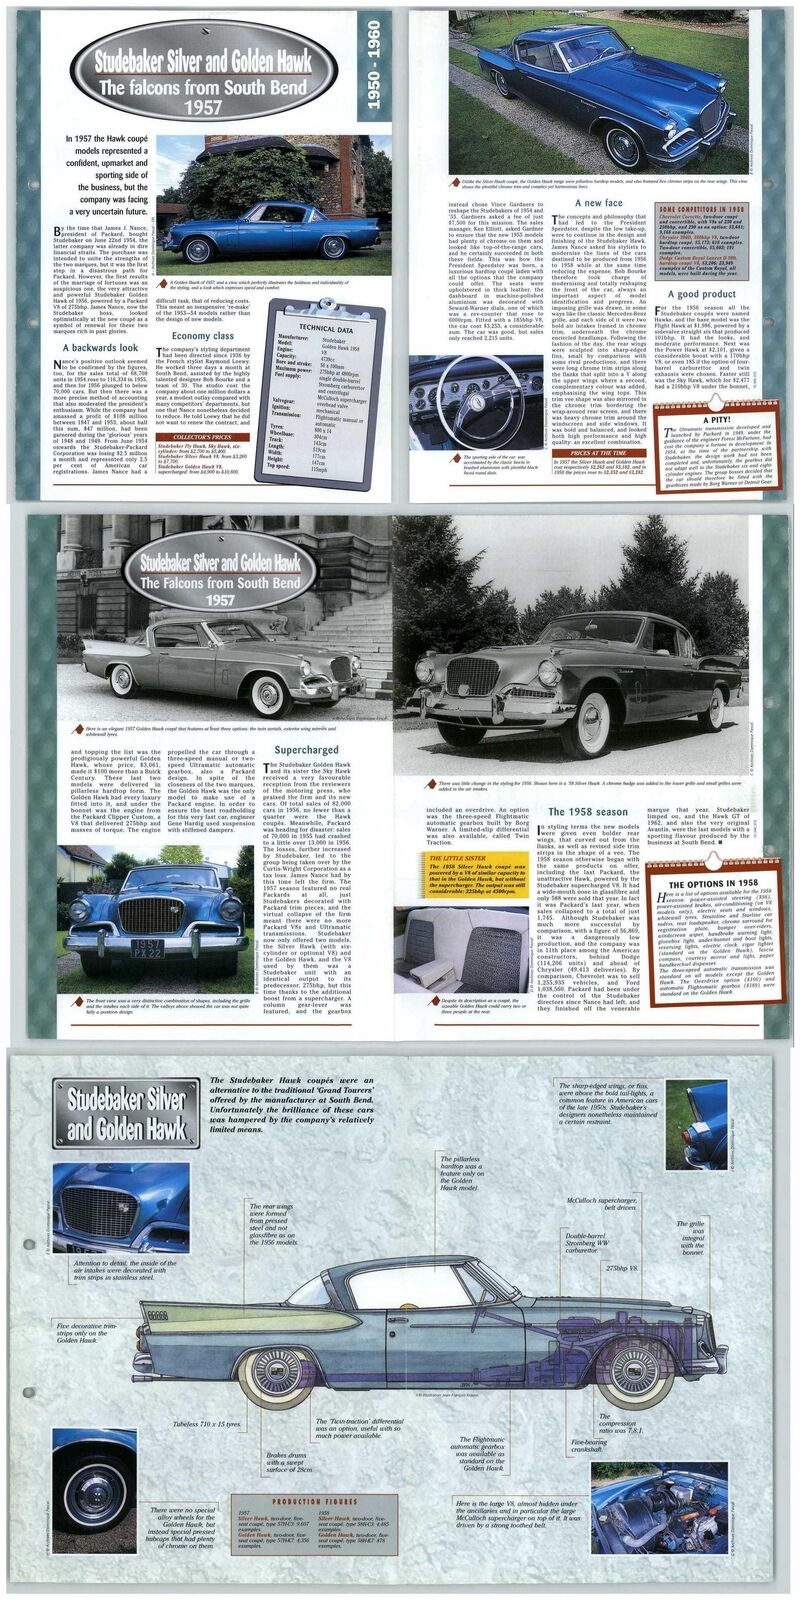 Studebaker Silver & Golden Hawk - 1950-1960 - Century Of Cars - Hachette 2 Pages